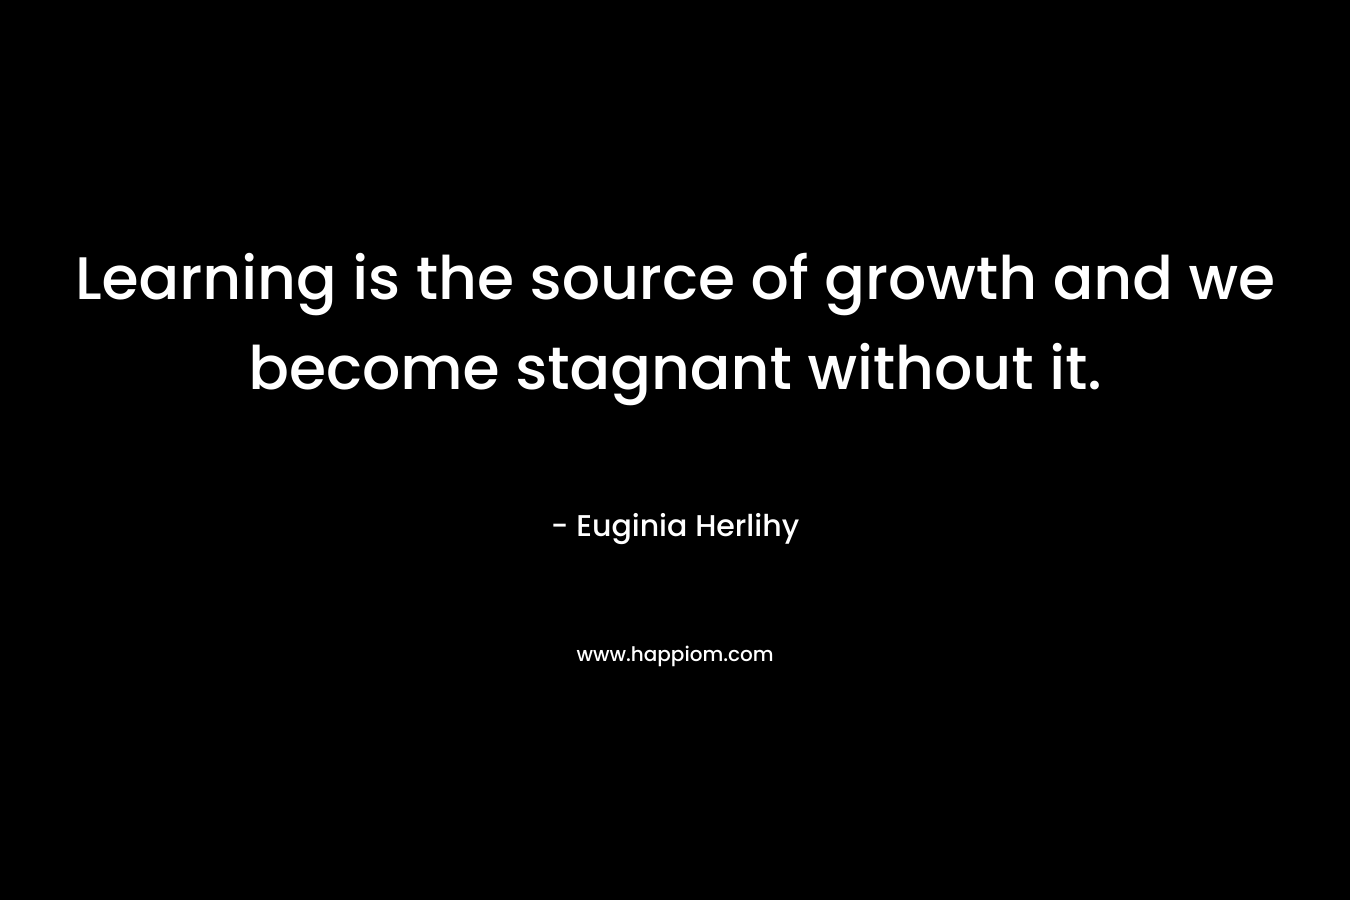 Learning is the source of growth and we become stagnant without it.